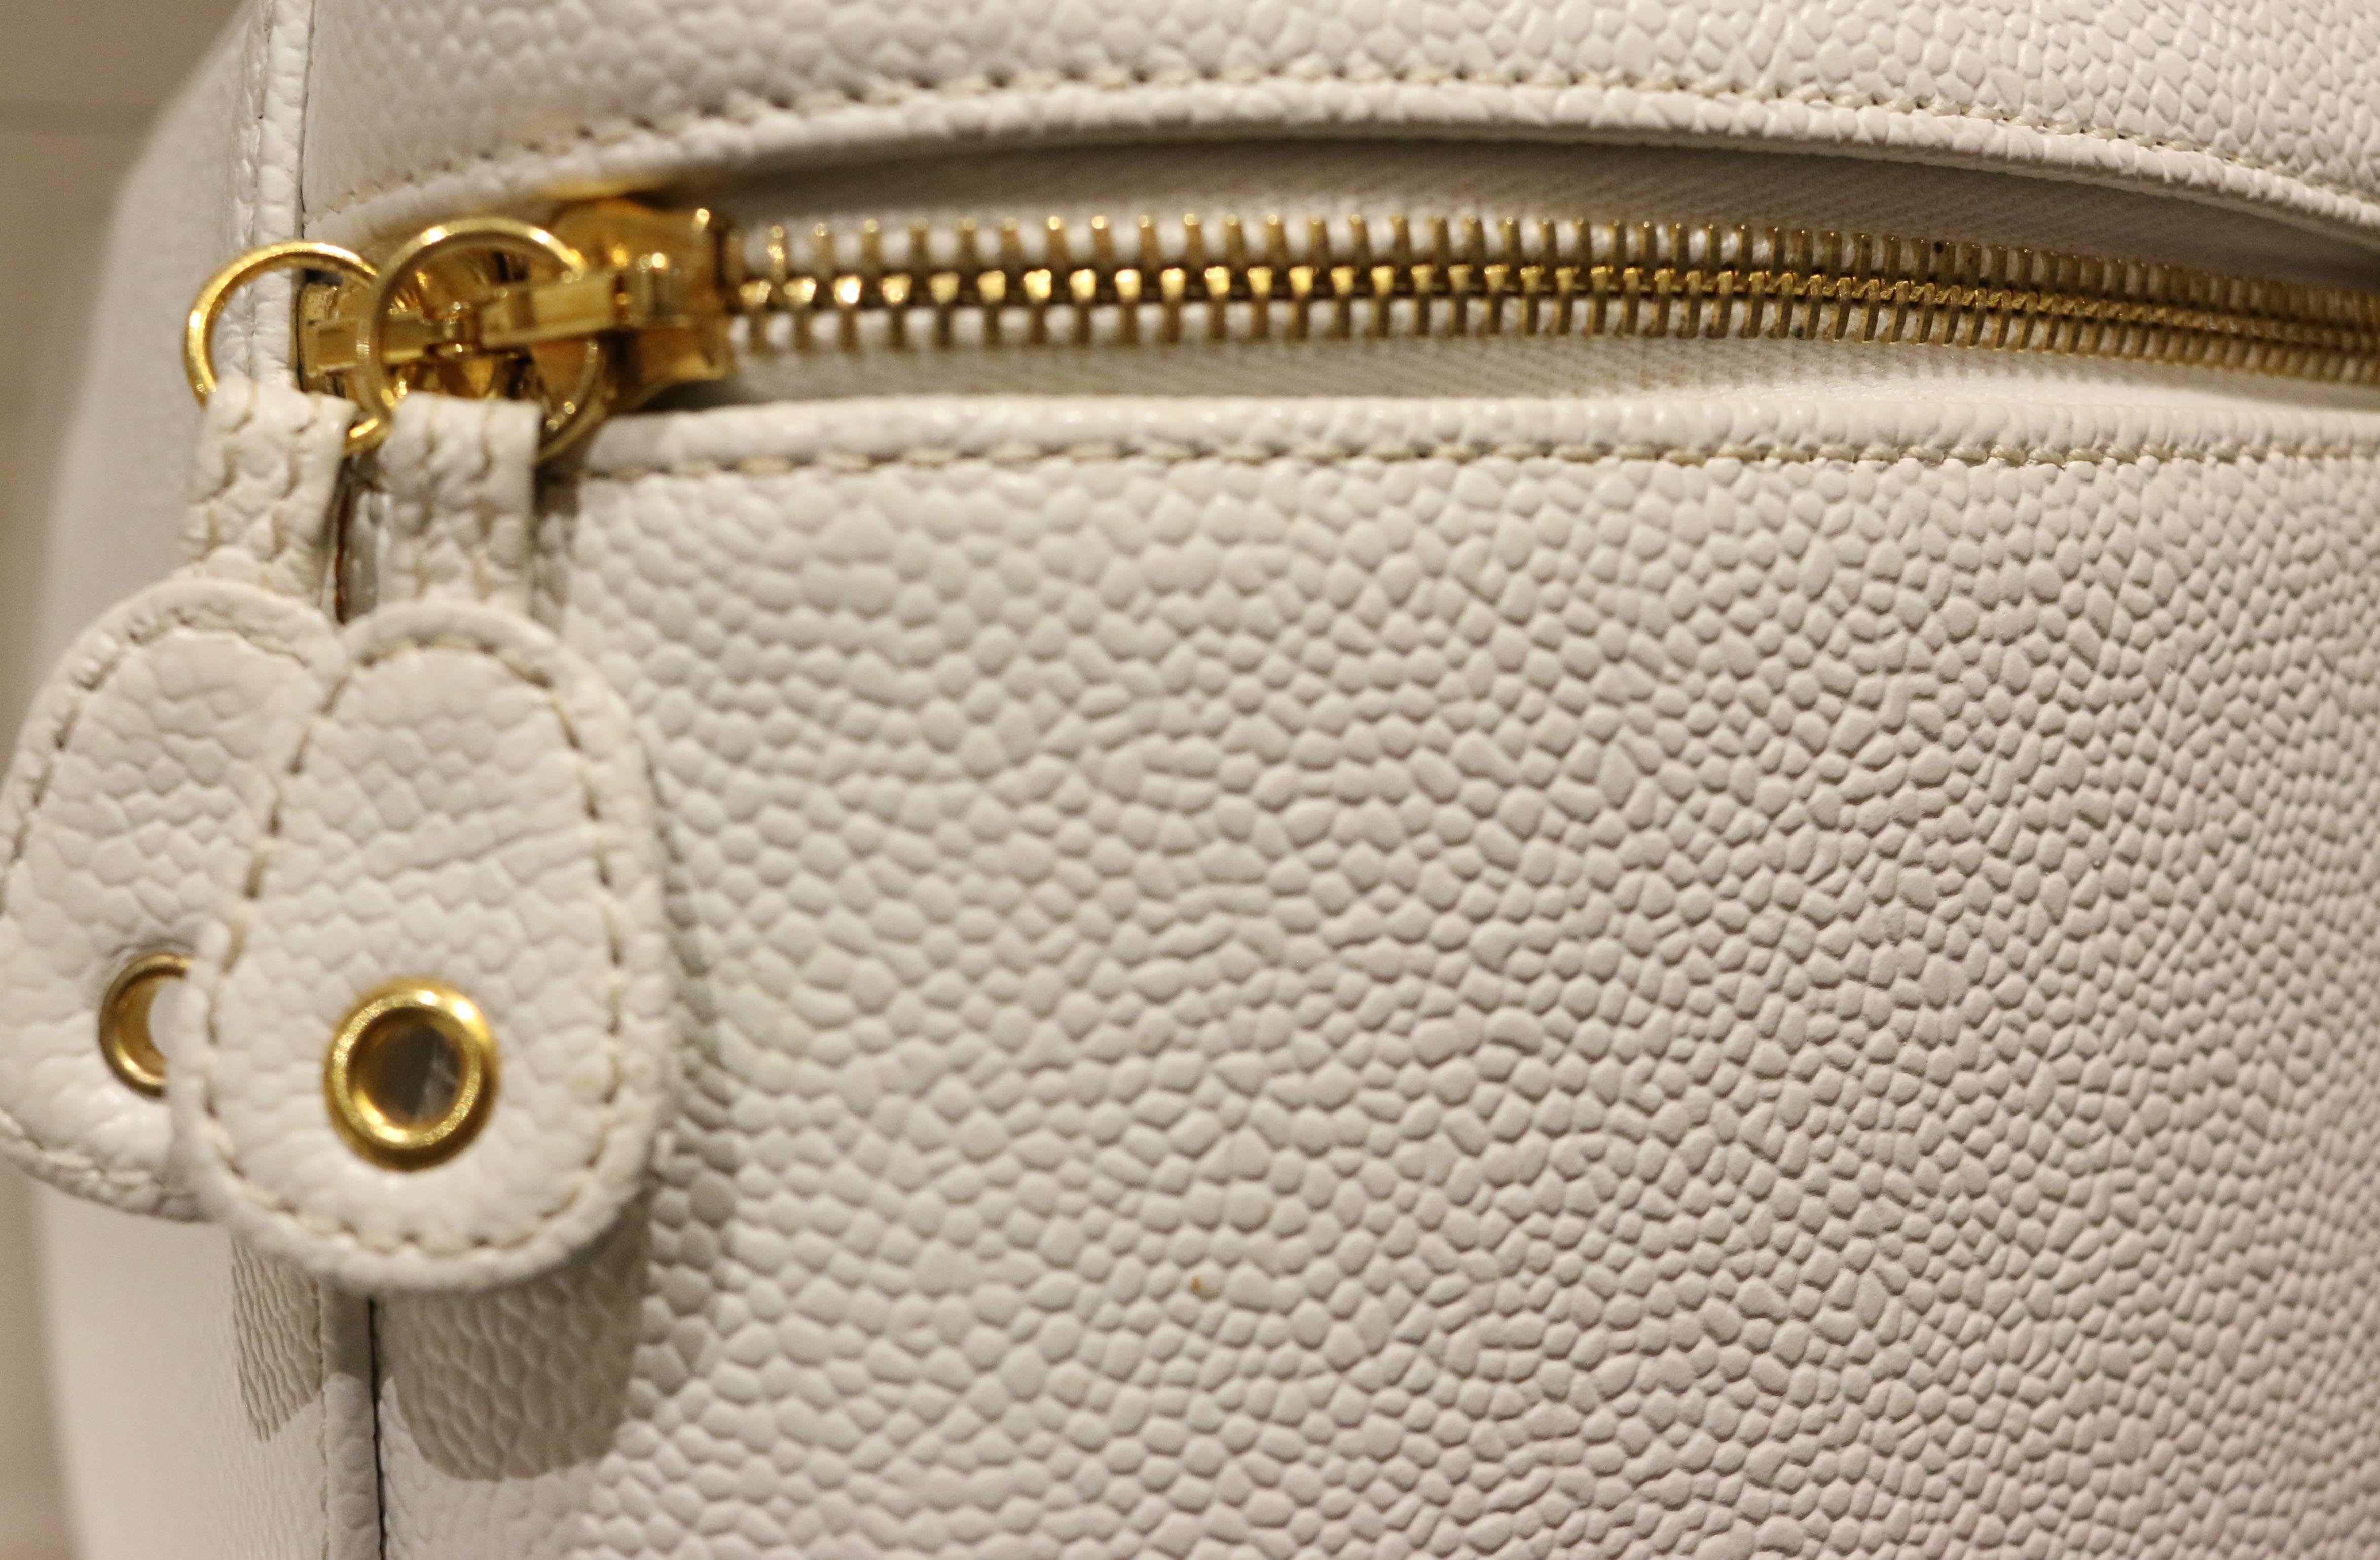 Women's Chanel White Caviar Leather Vanity Bag with Strap